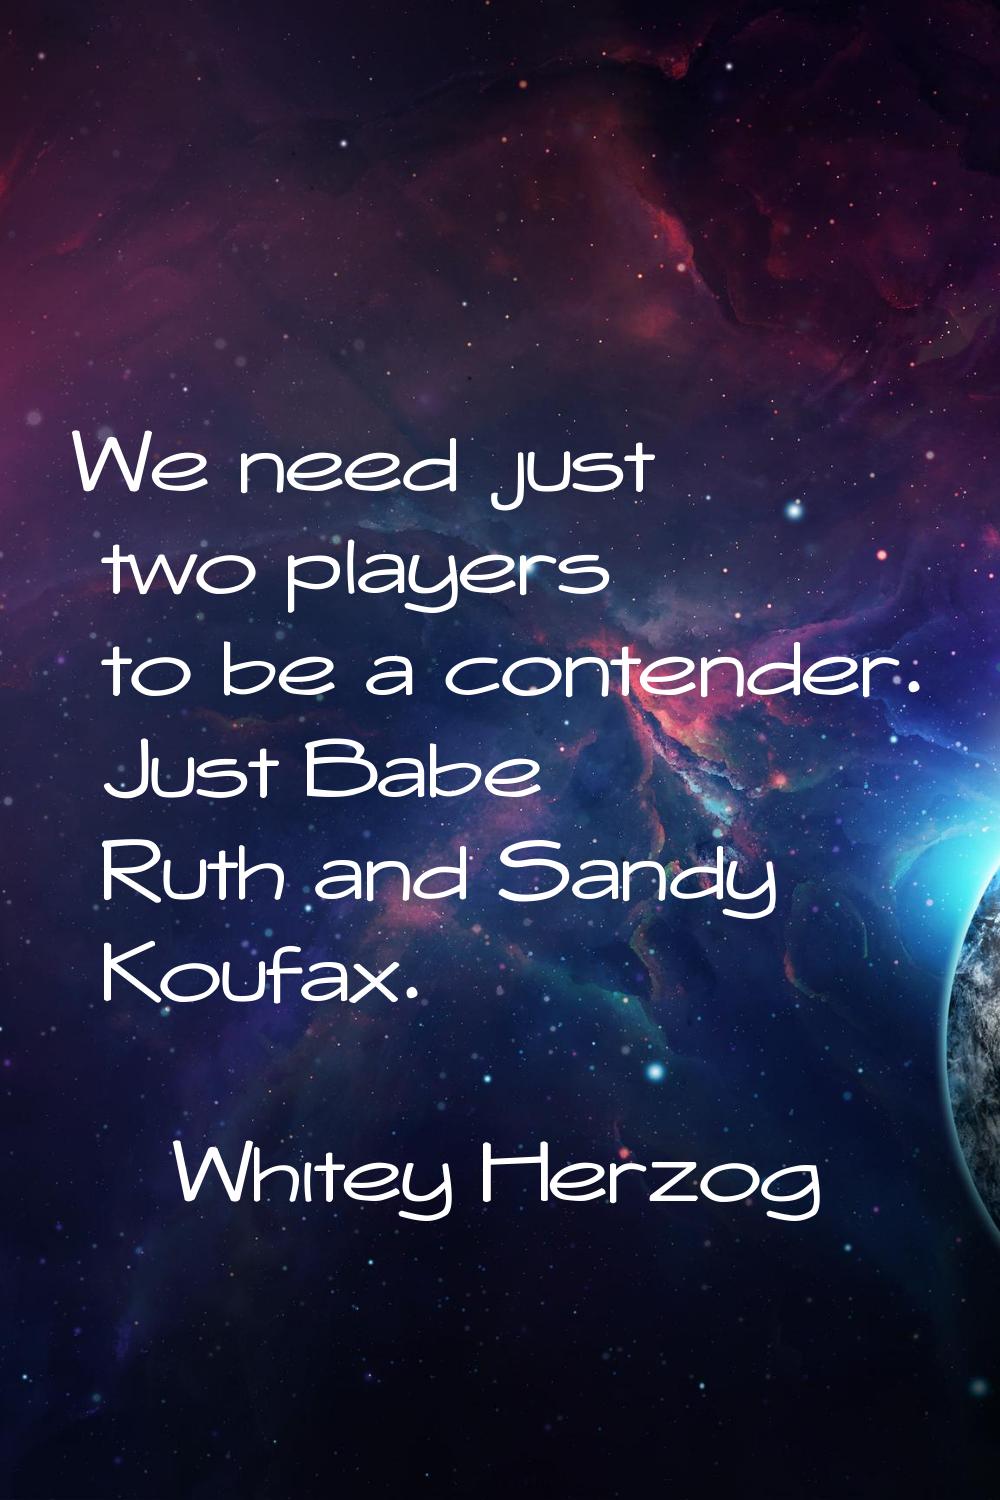 We need just two players to be a contender. Just Babe Ruth and Sandy Koufax.